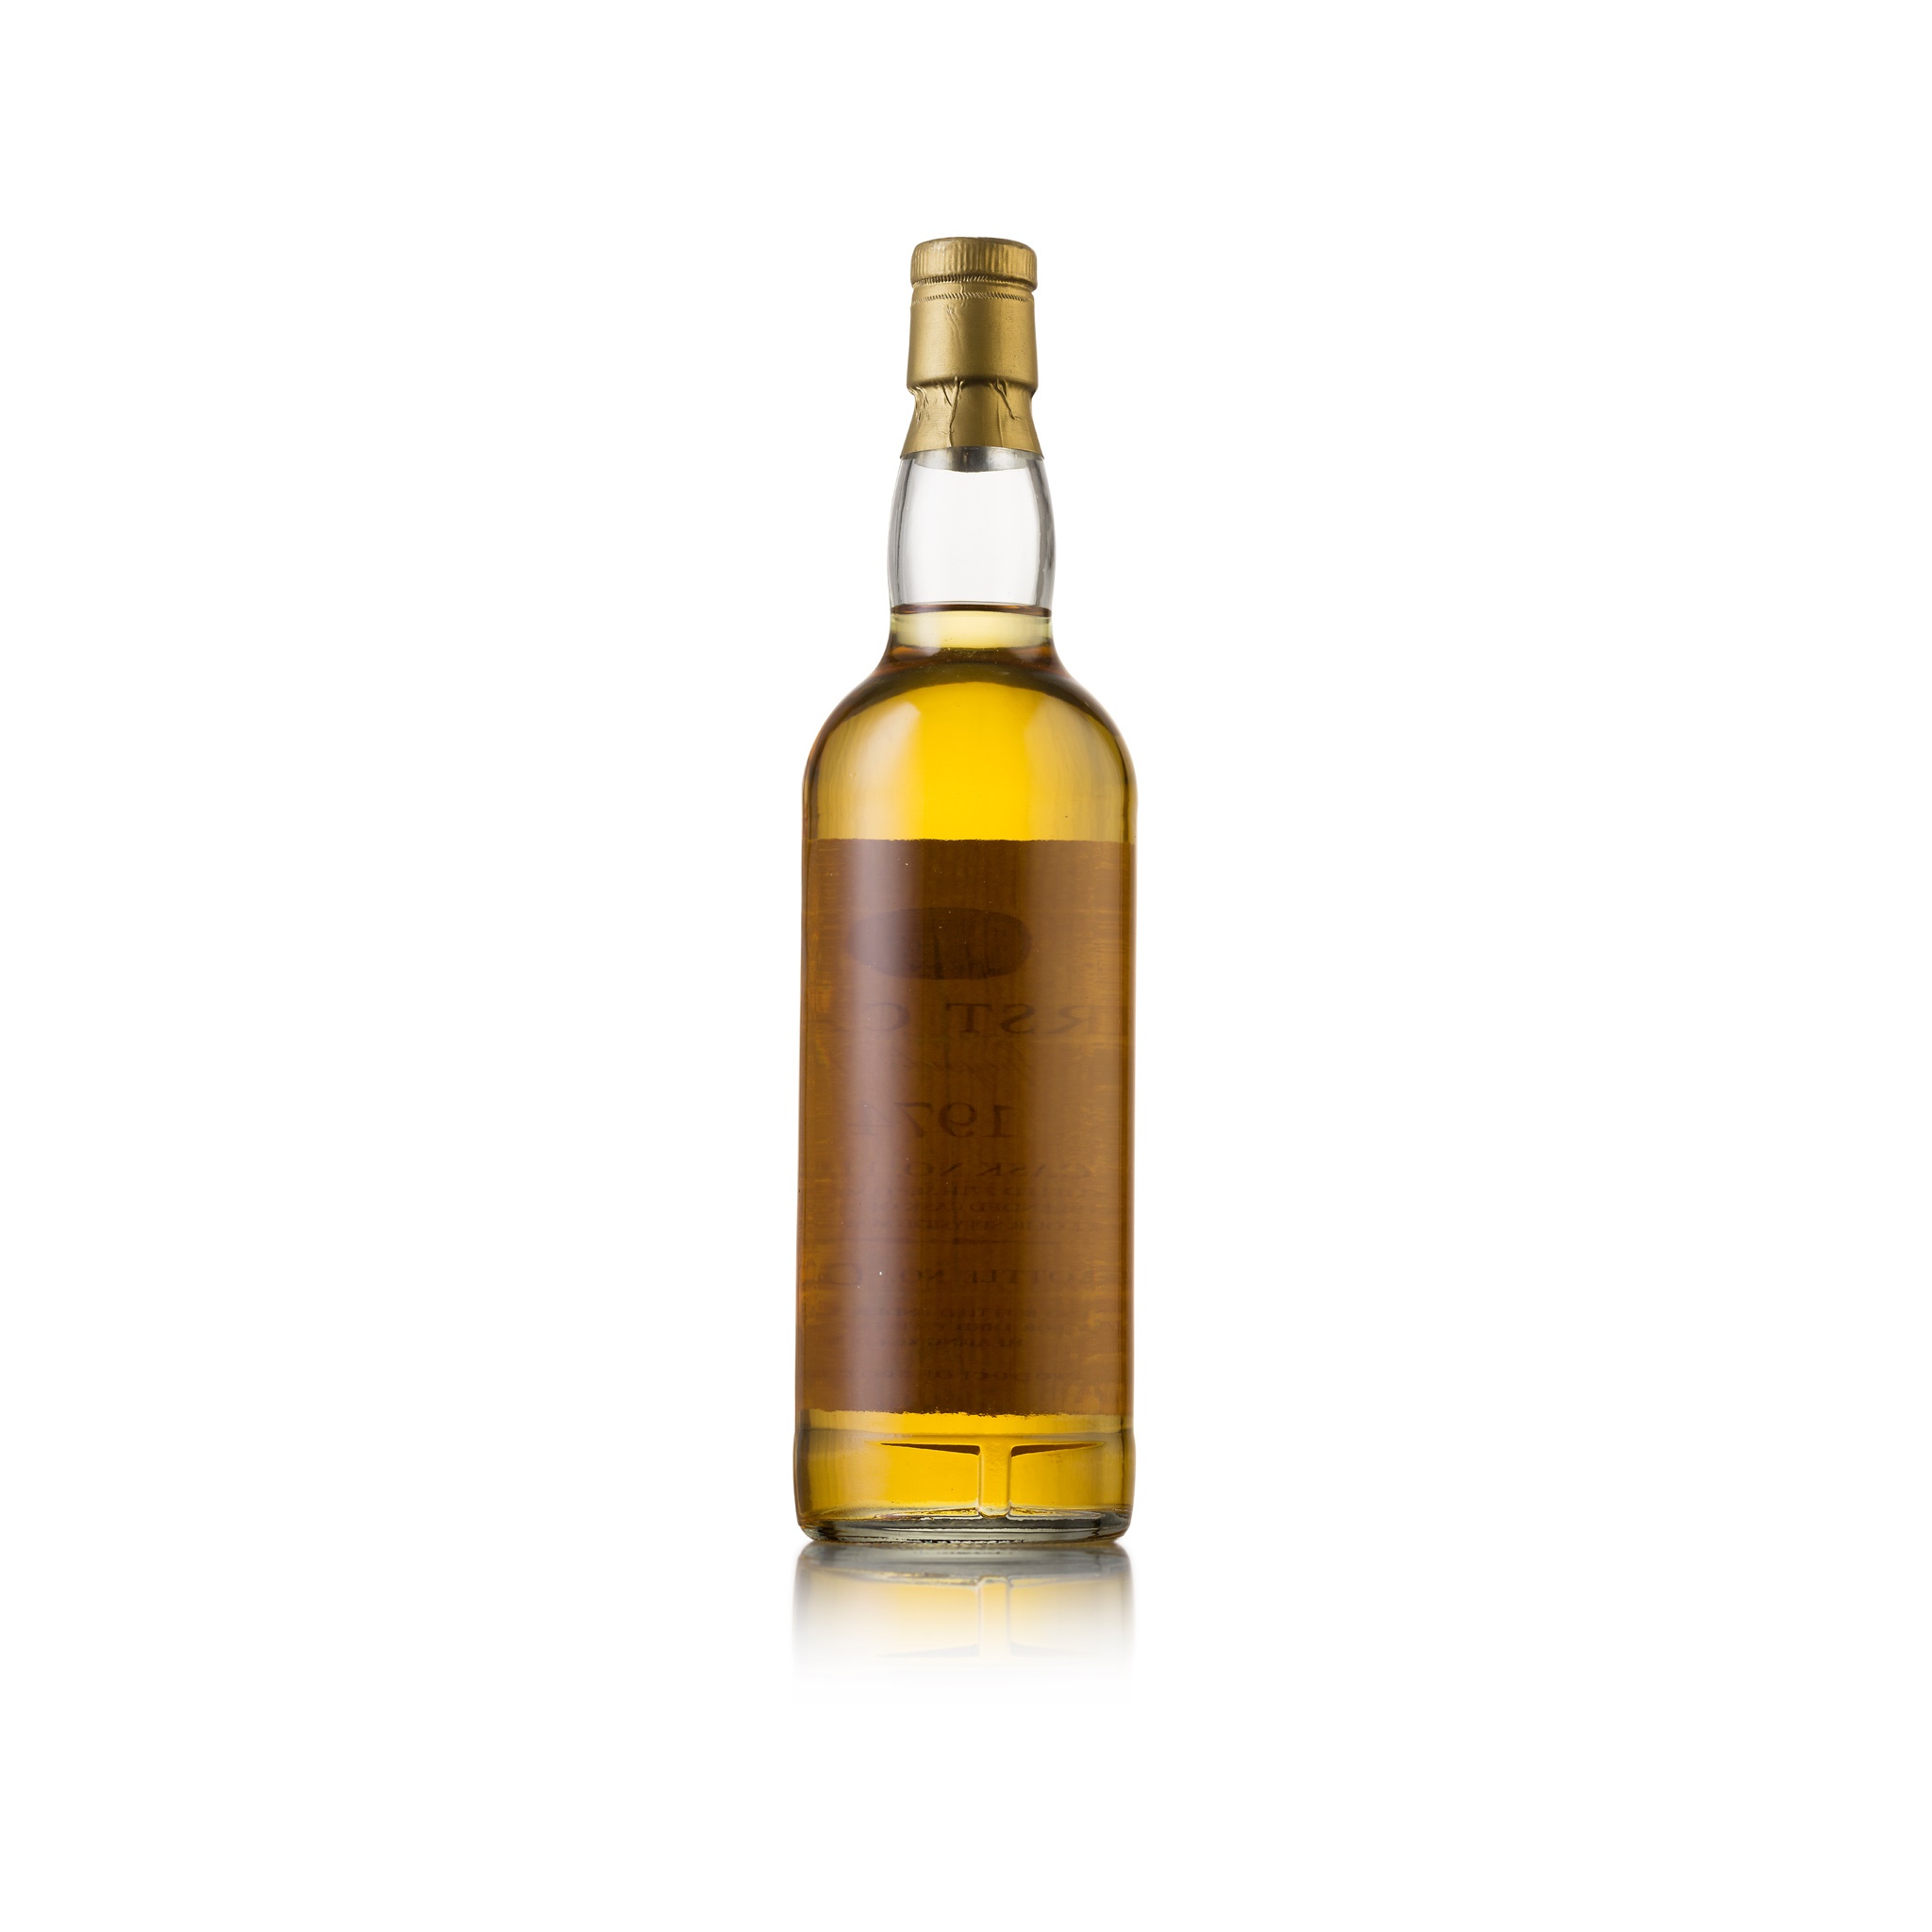 ABERLOUR 1974 19 YEAR OLD - FIRST CASK cask number 11021, bottle number 3(70cl/ 46%) - Image 2 of 2